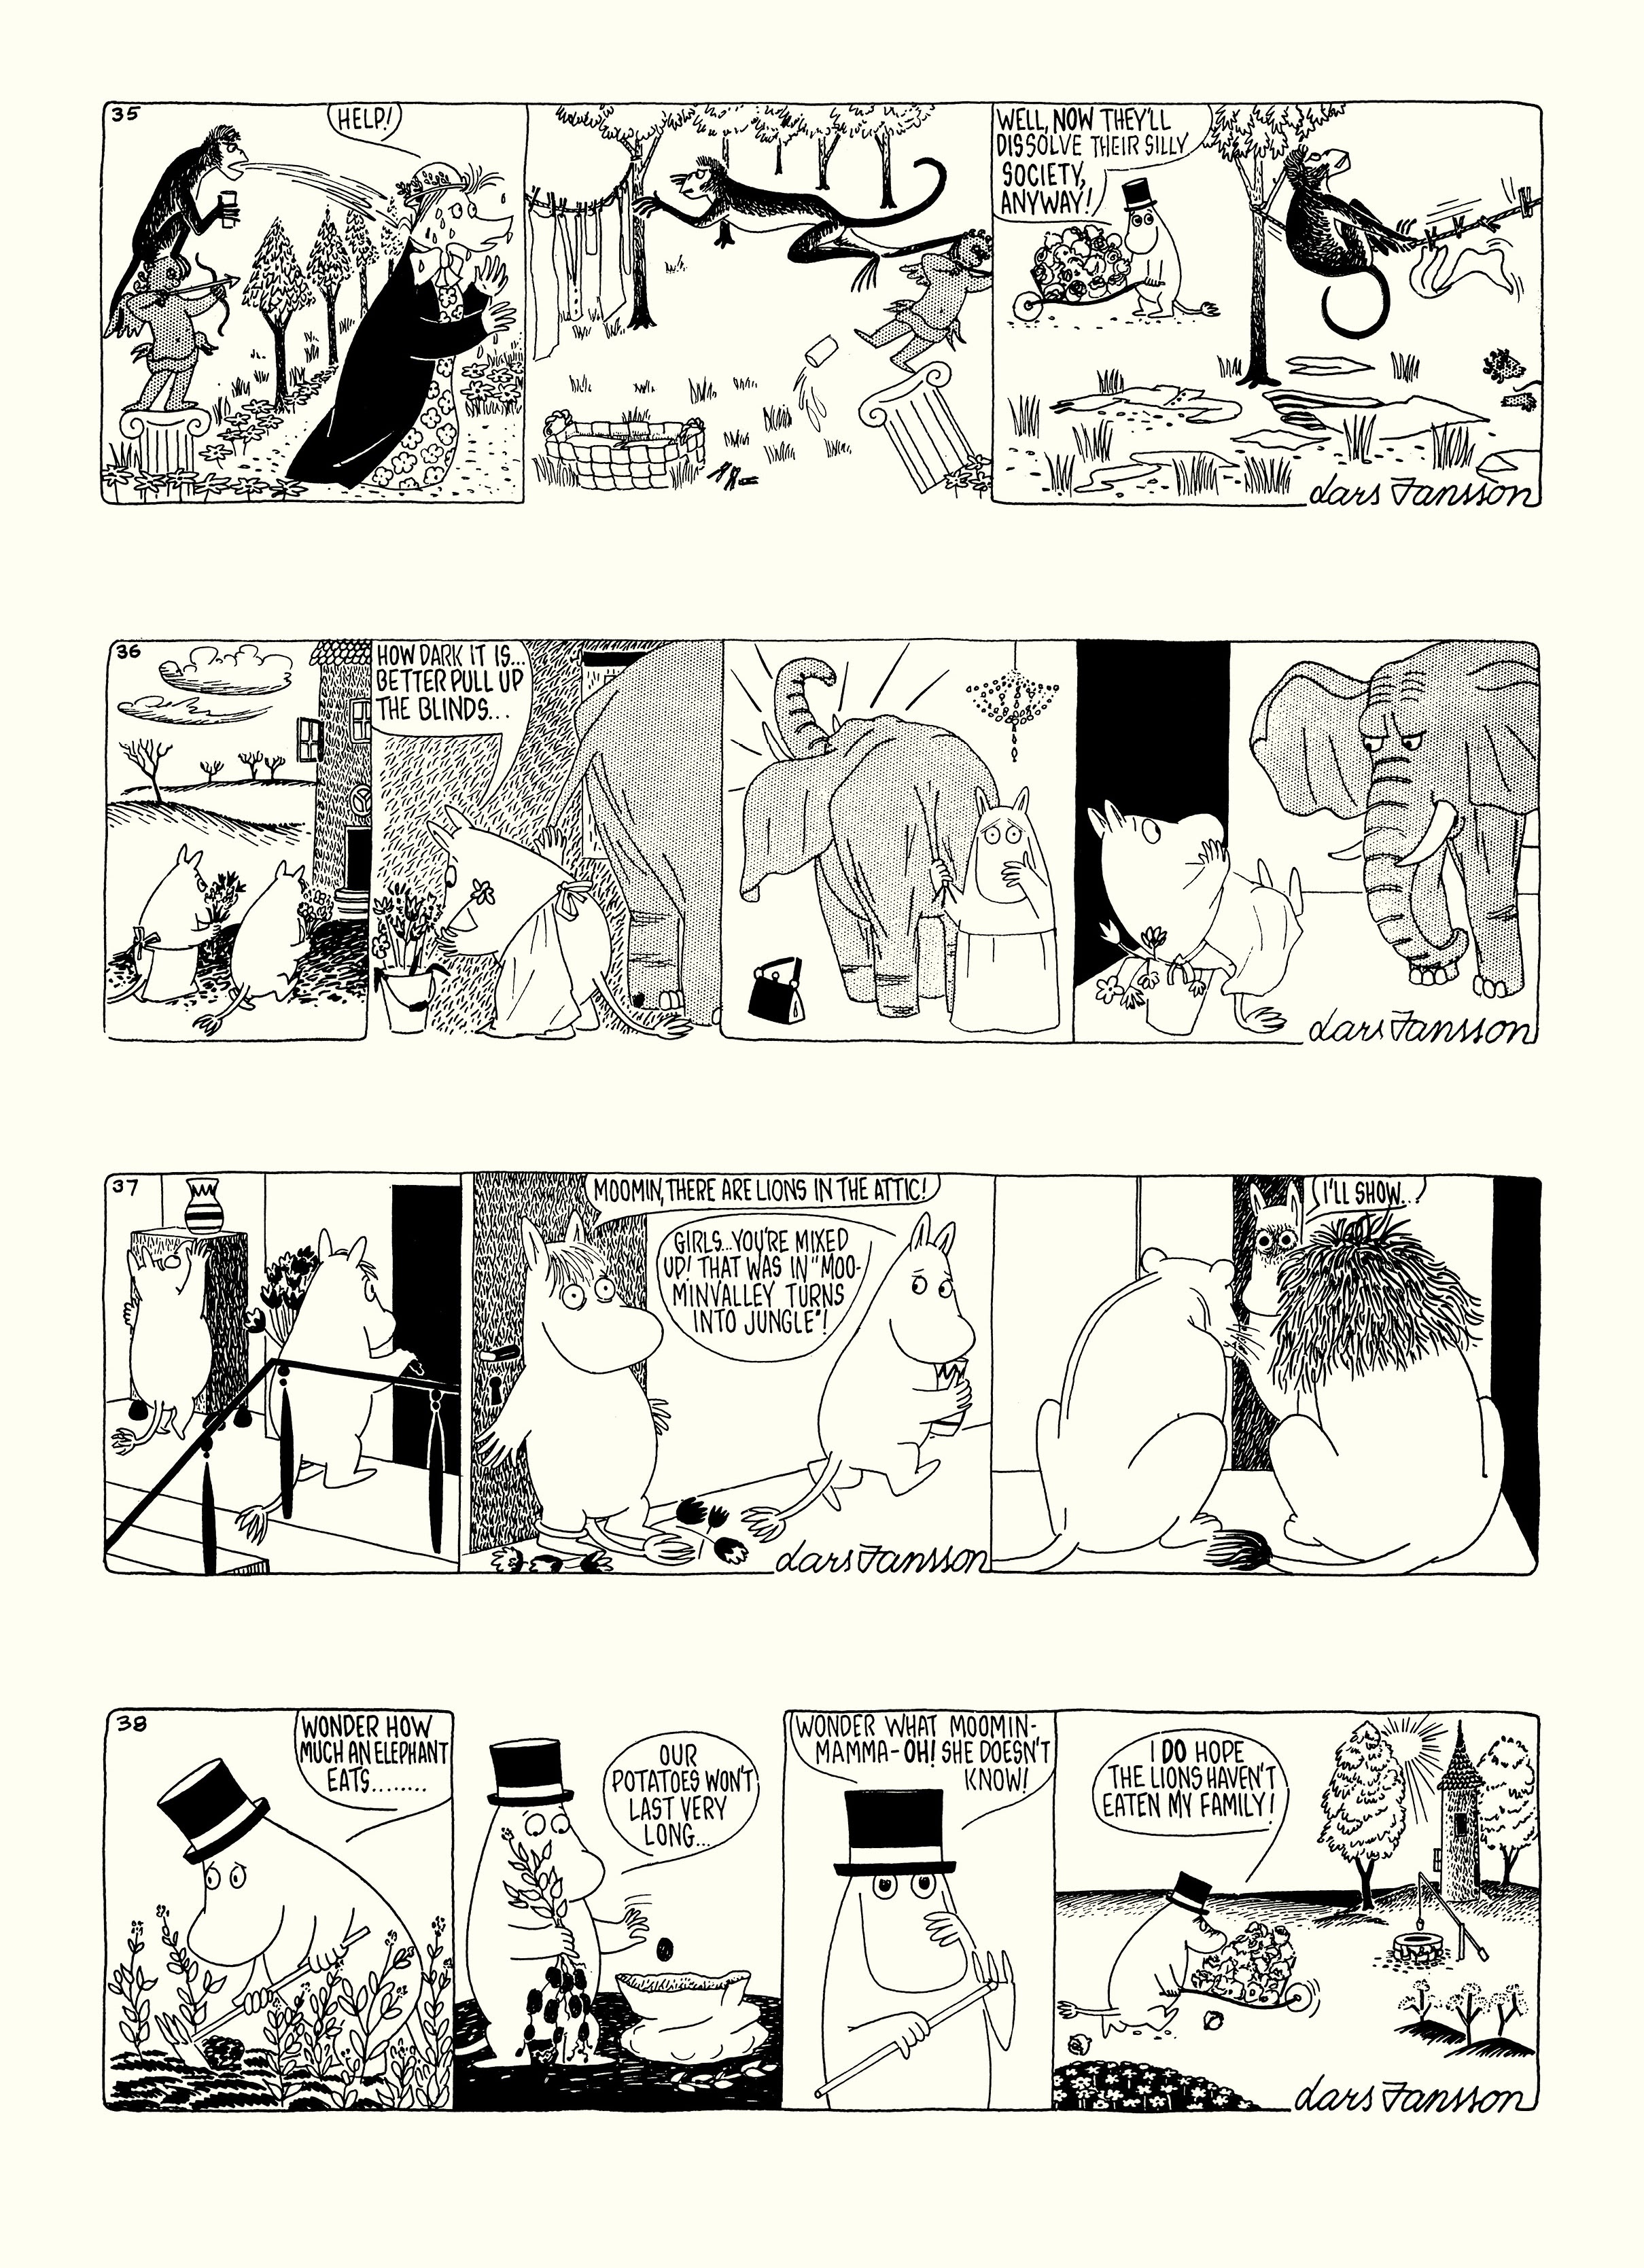 Read online Moomin: The Complete Lars Jansson Comic Strip comic -  Issue # TPB 6 - 77